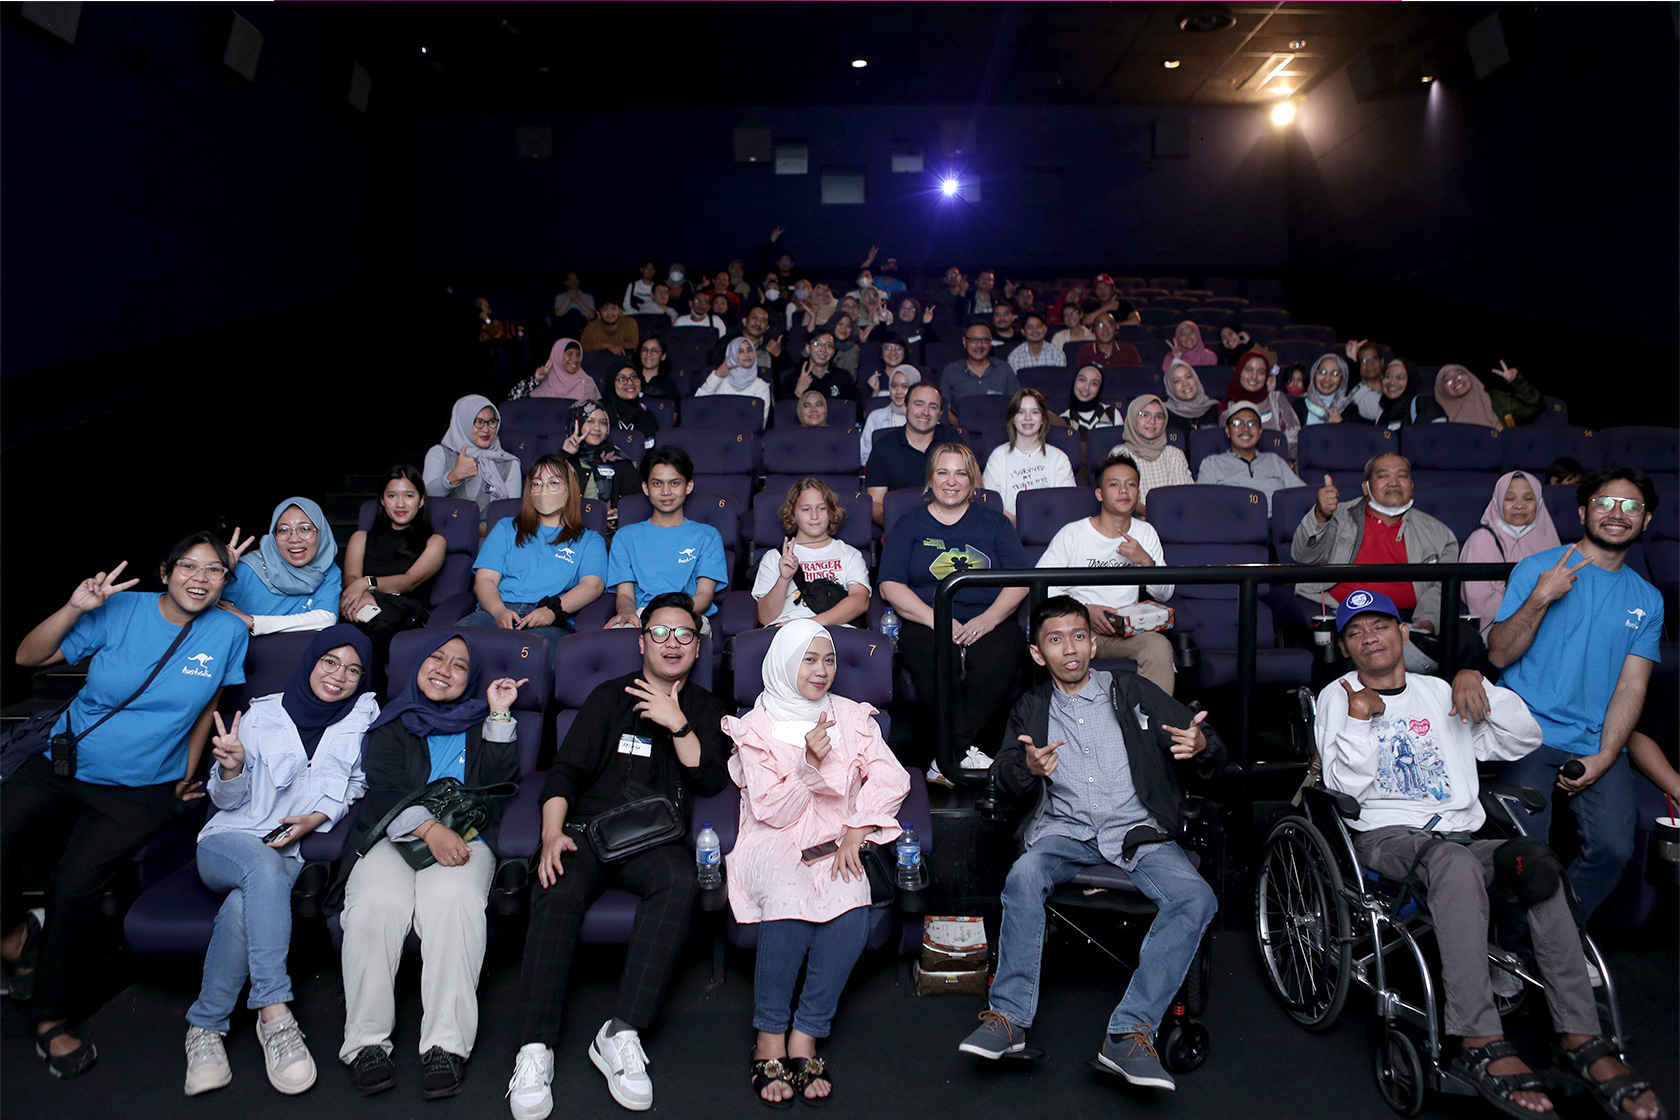 All “Nobar” participants in Bandung took a picture together before the film screening started.